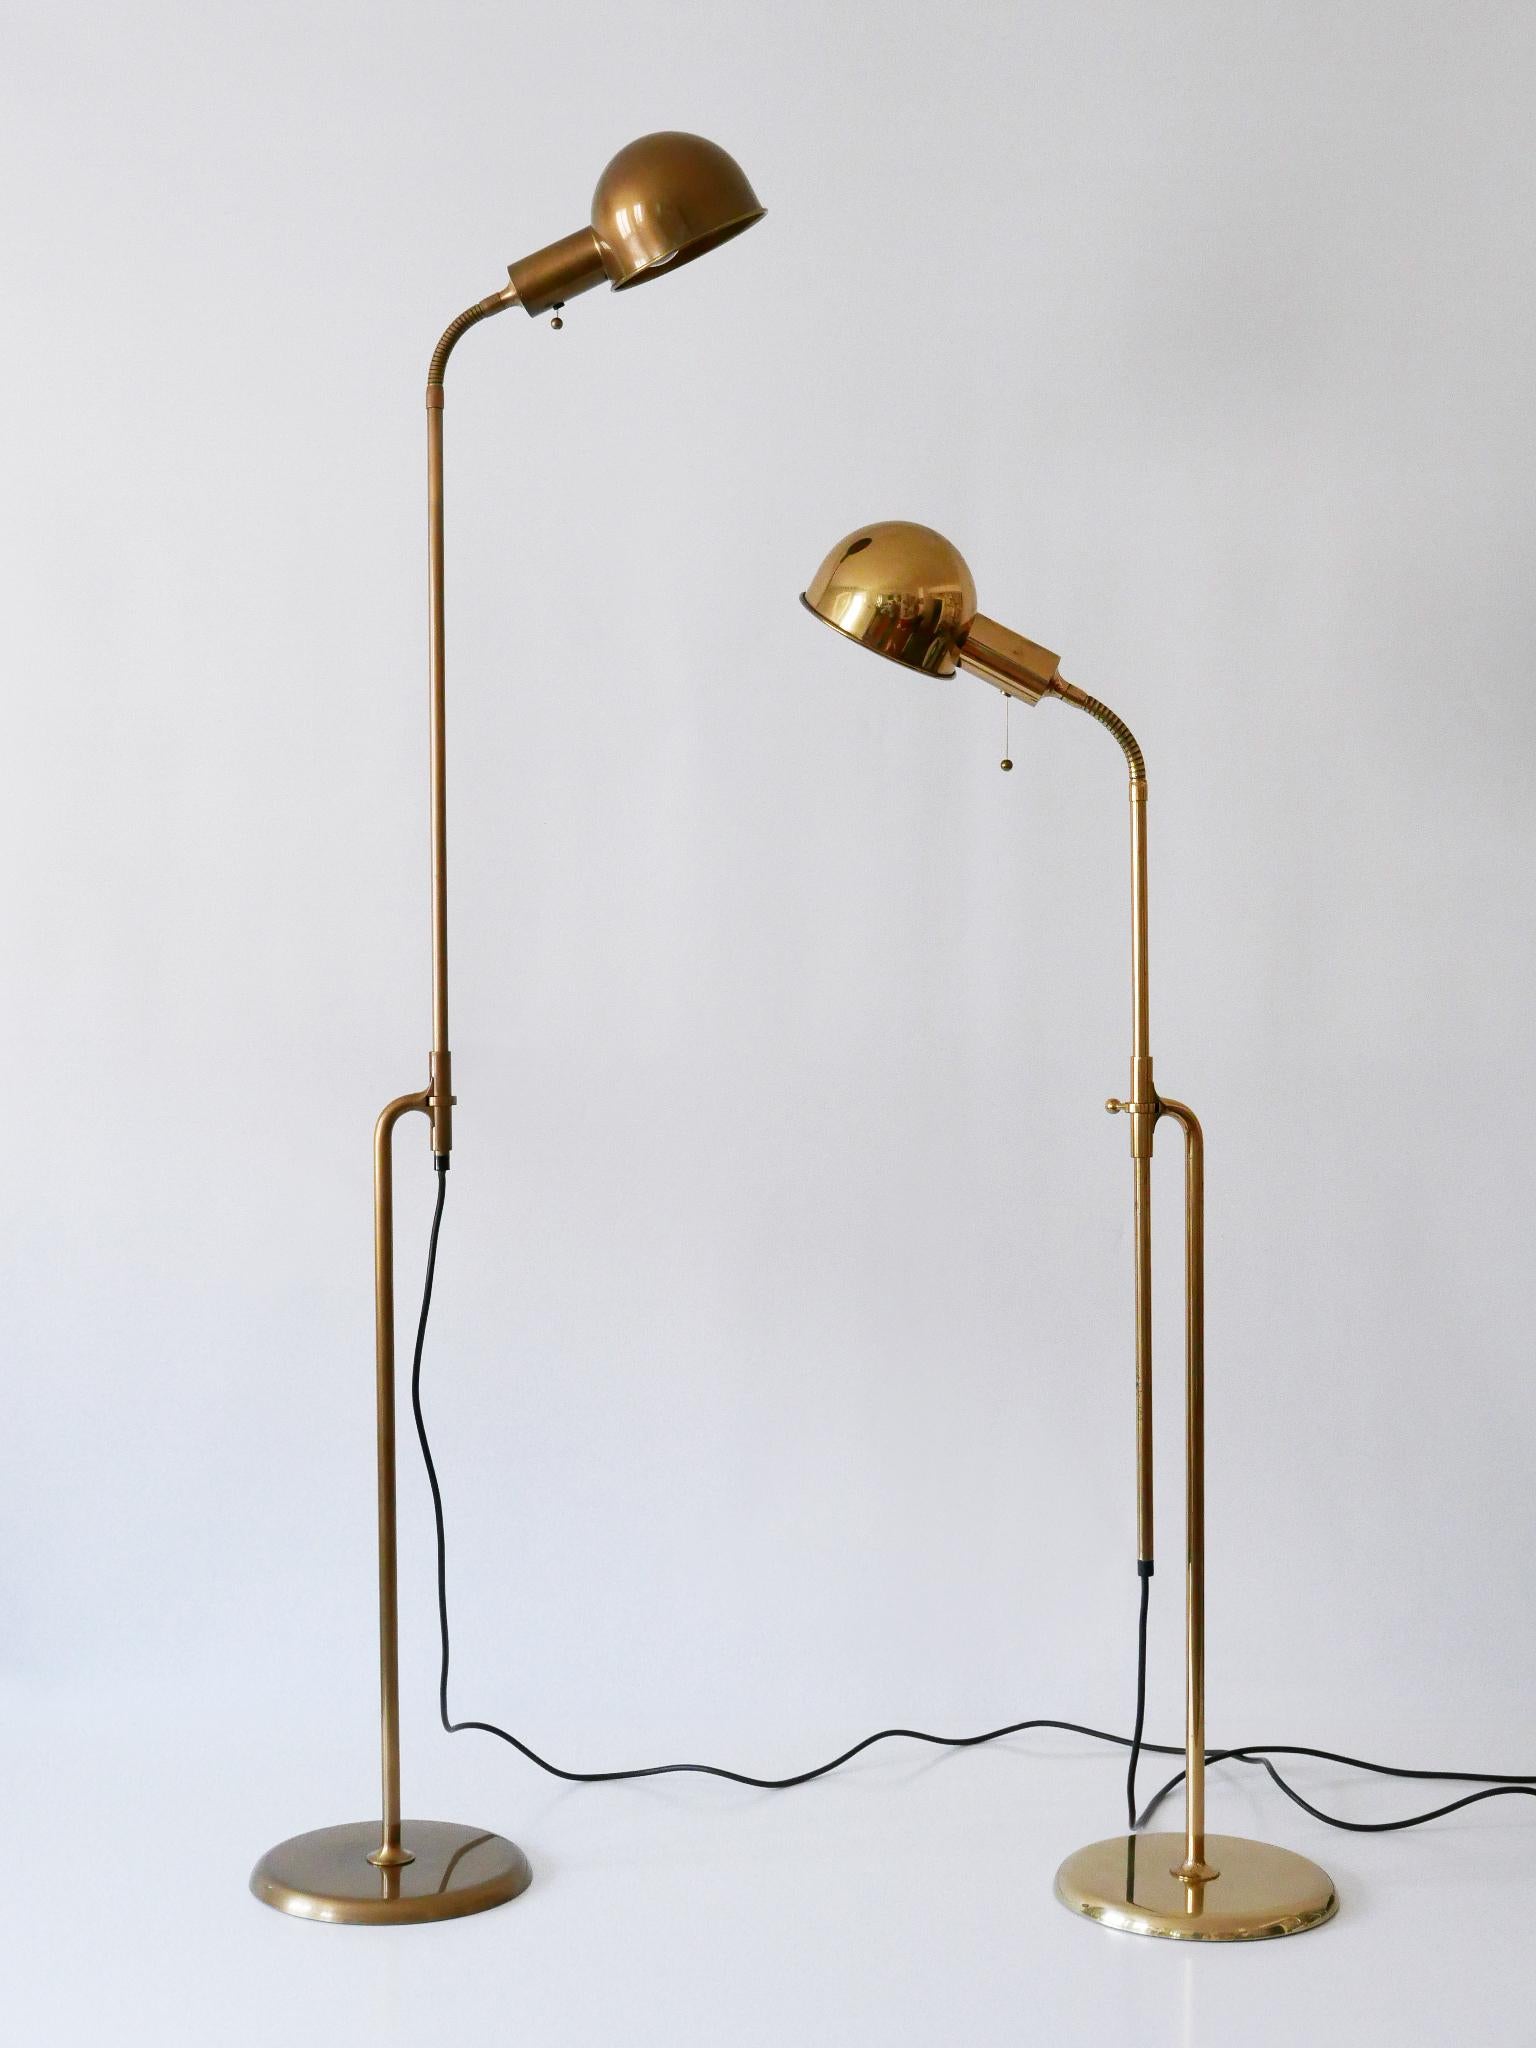 Brass Set of Two Mid-Century Modern Reading Floor Lamps 'Bola' by Florian Schulz 1970s For Sale